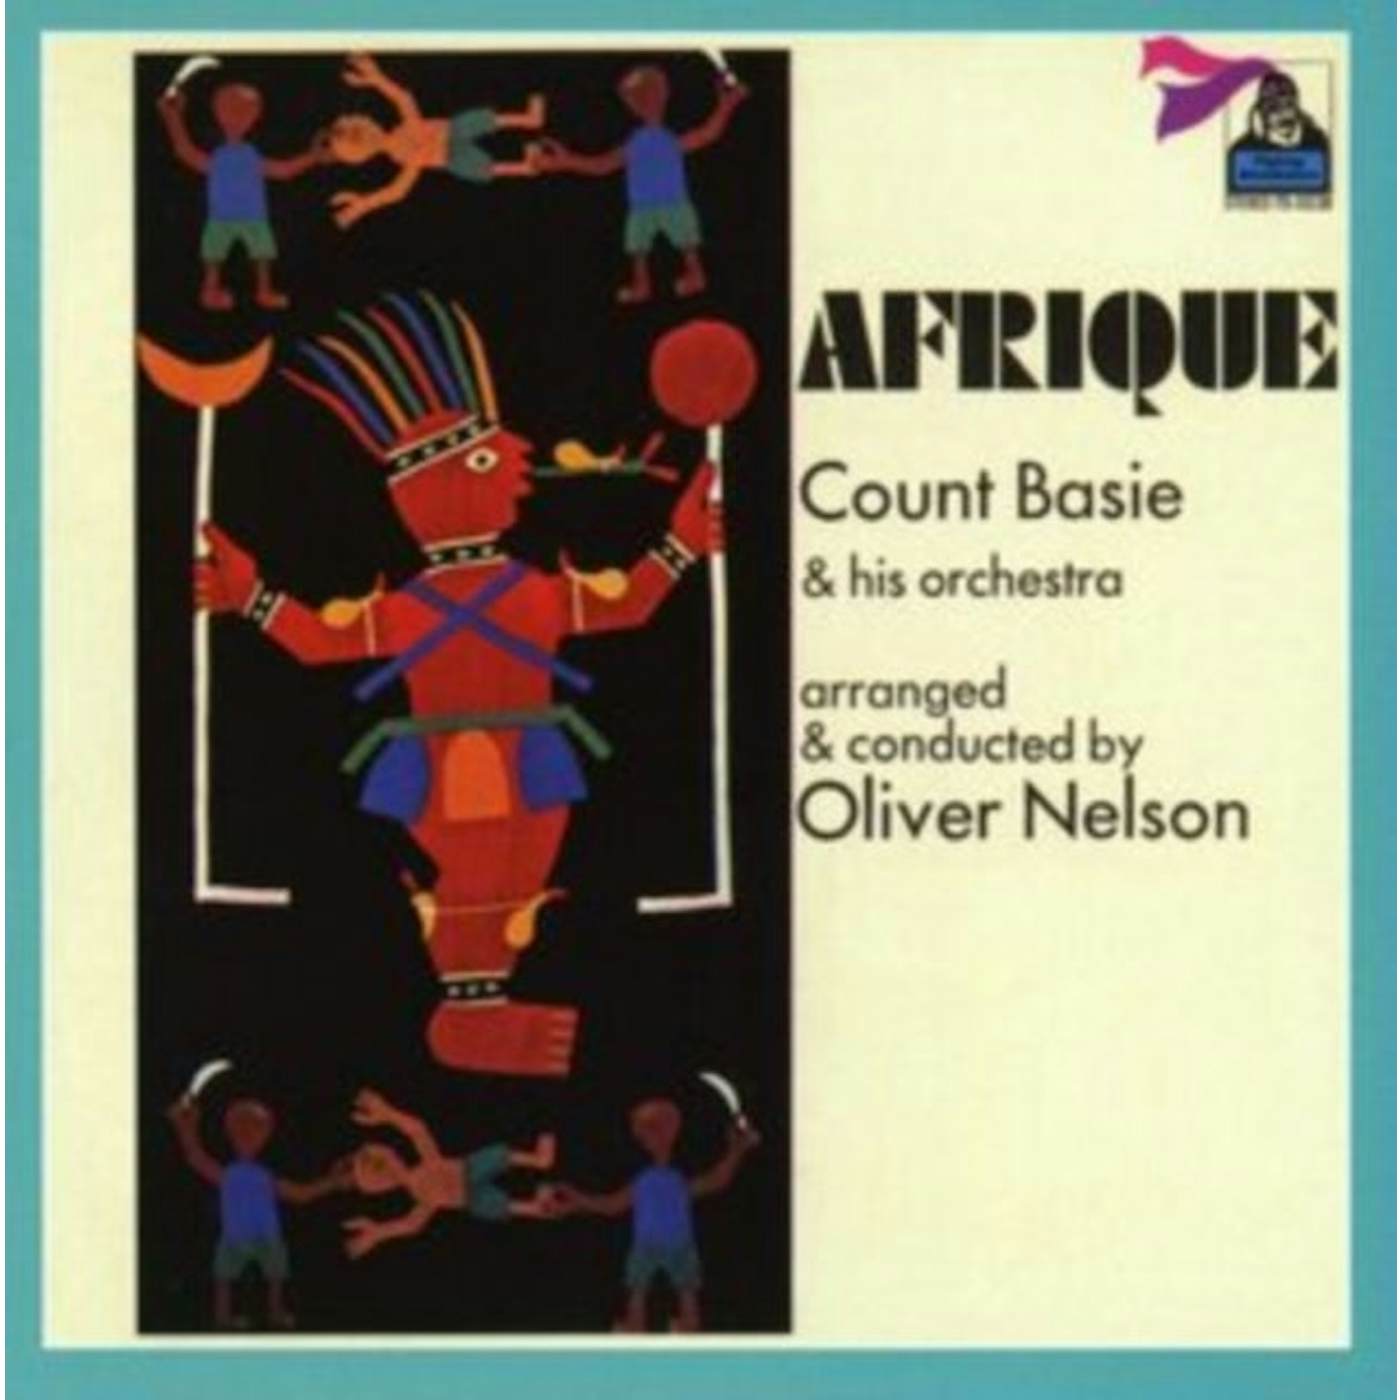 Count Basie & His Orchestra CD - Afrique